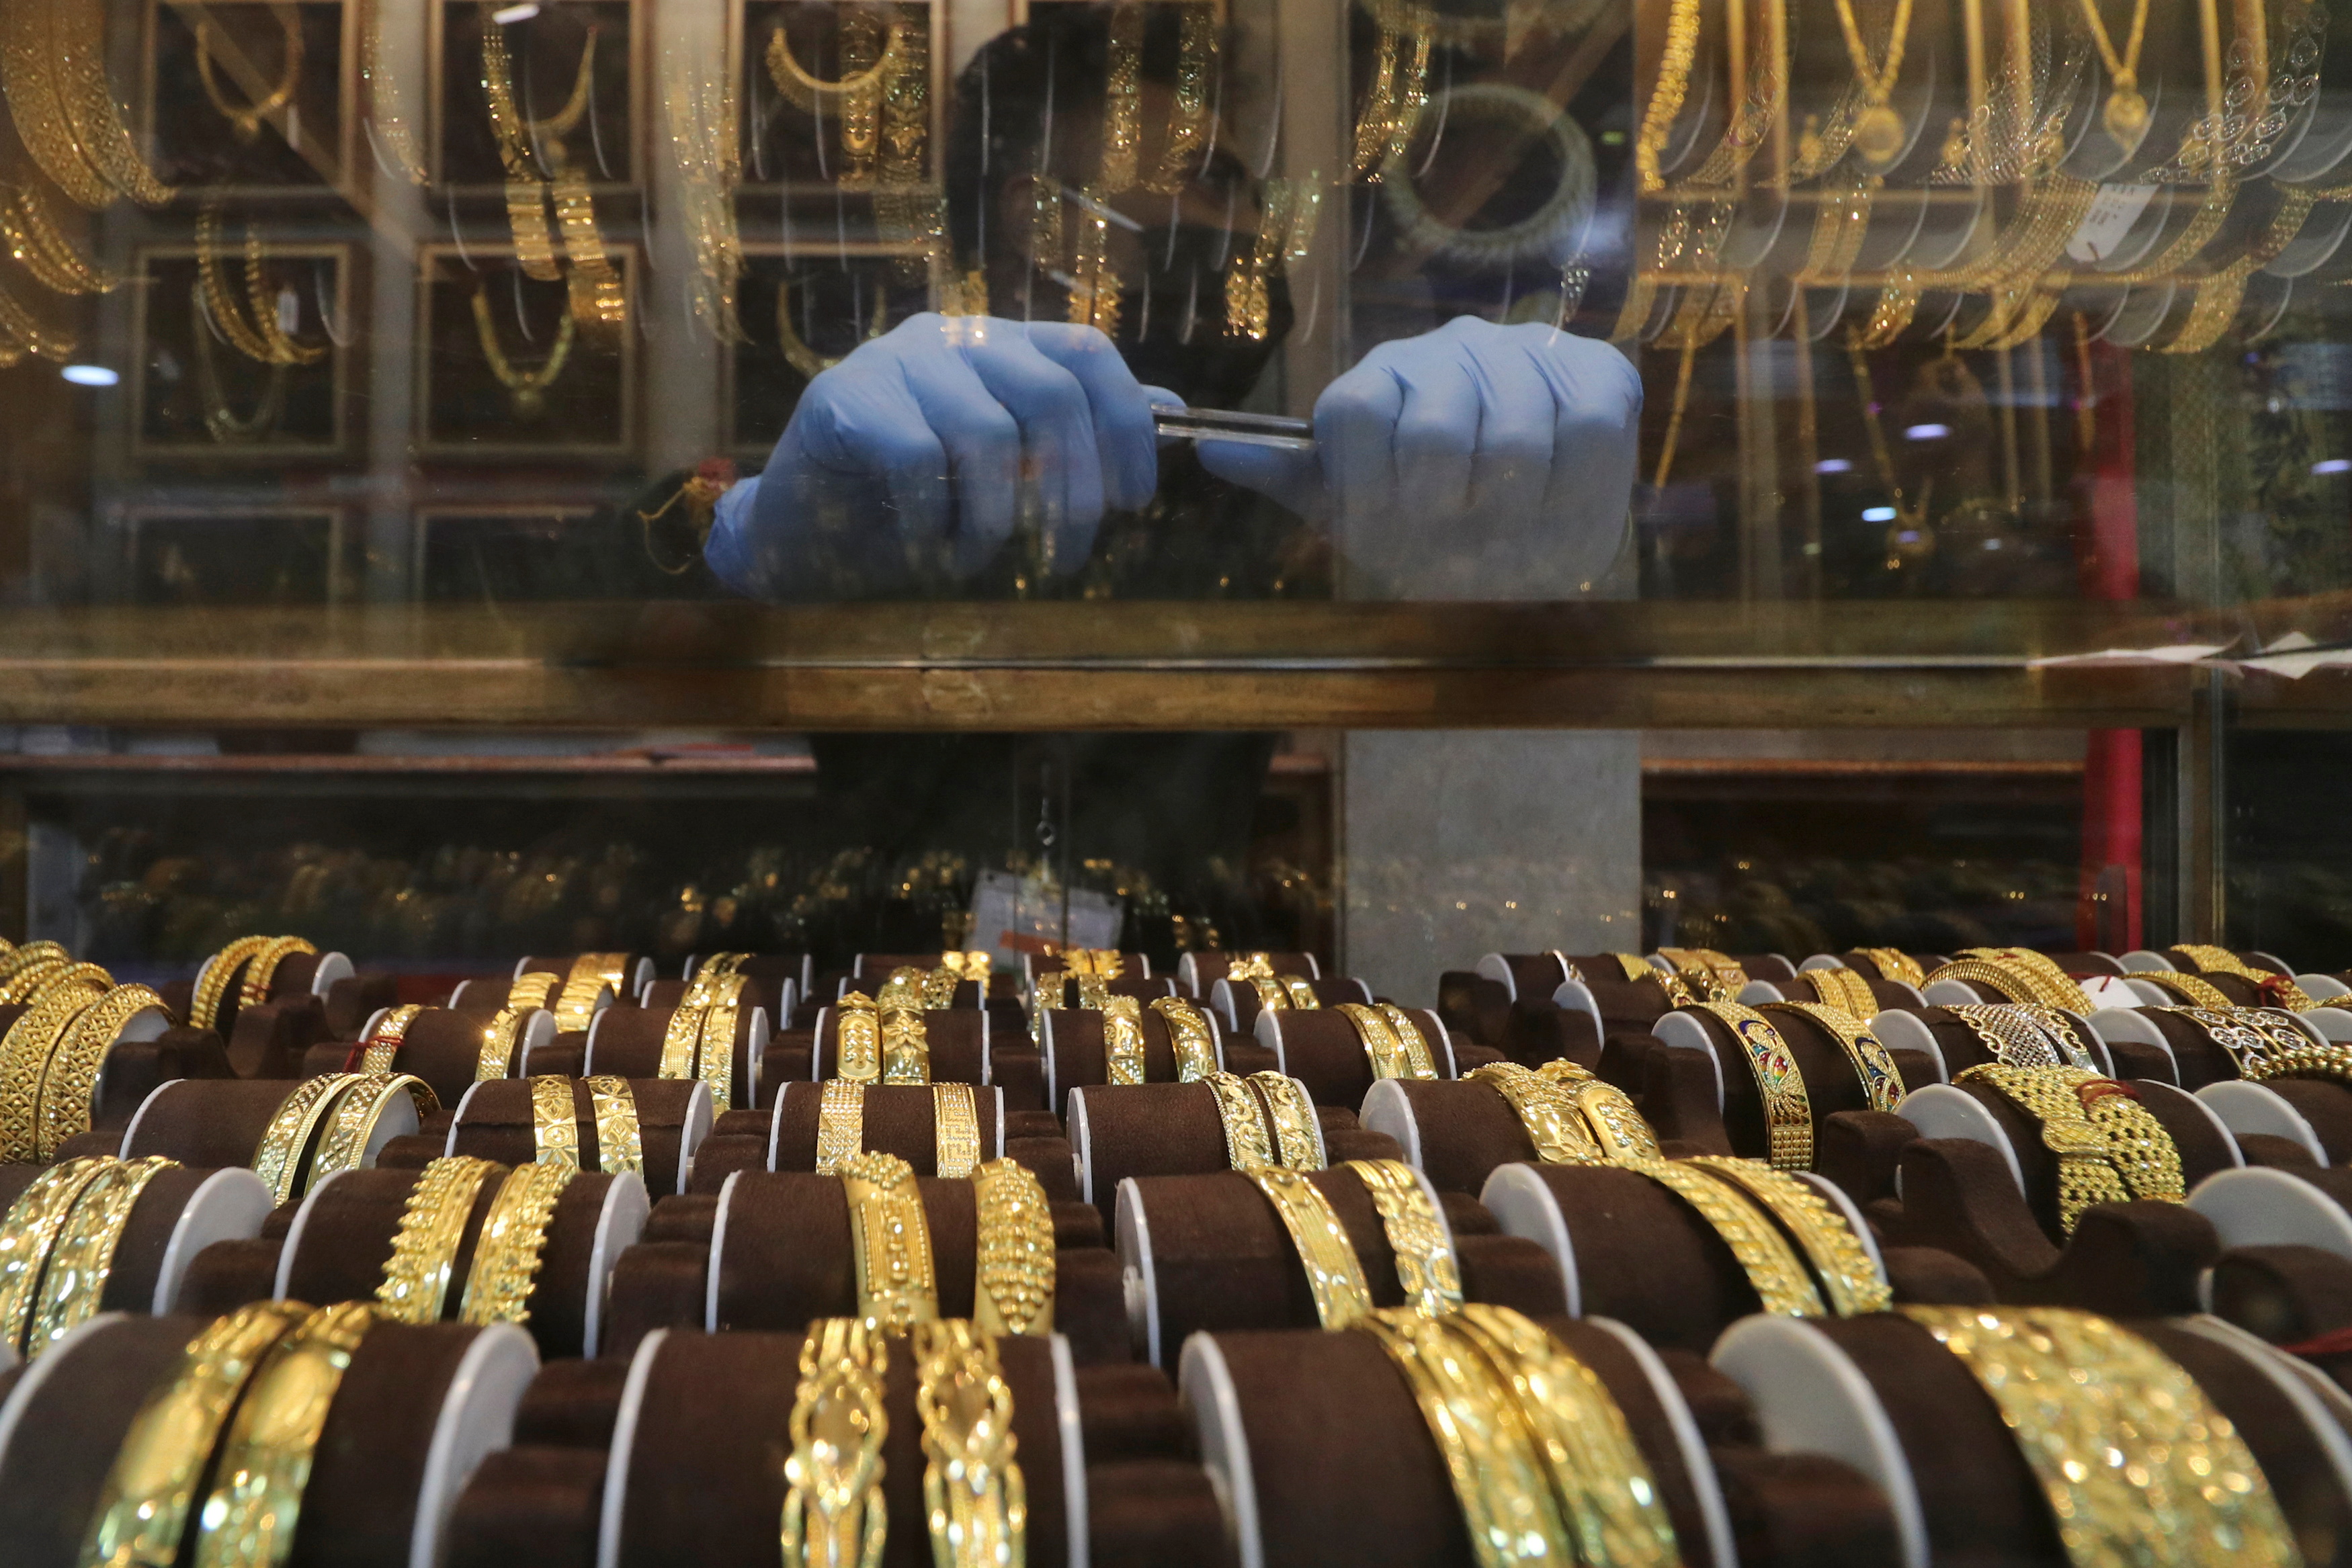 Seller waits for customers at a jewellery showroom during Dhanteras, a Hindu festival associated with Lakshmi, the goddess of wealth, amidst the spread of COVID-19 in Mumbai